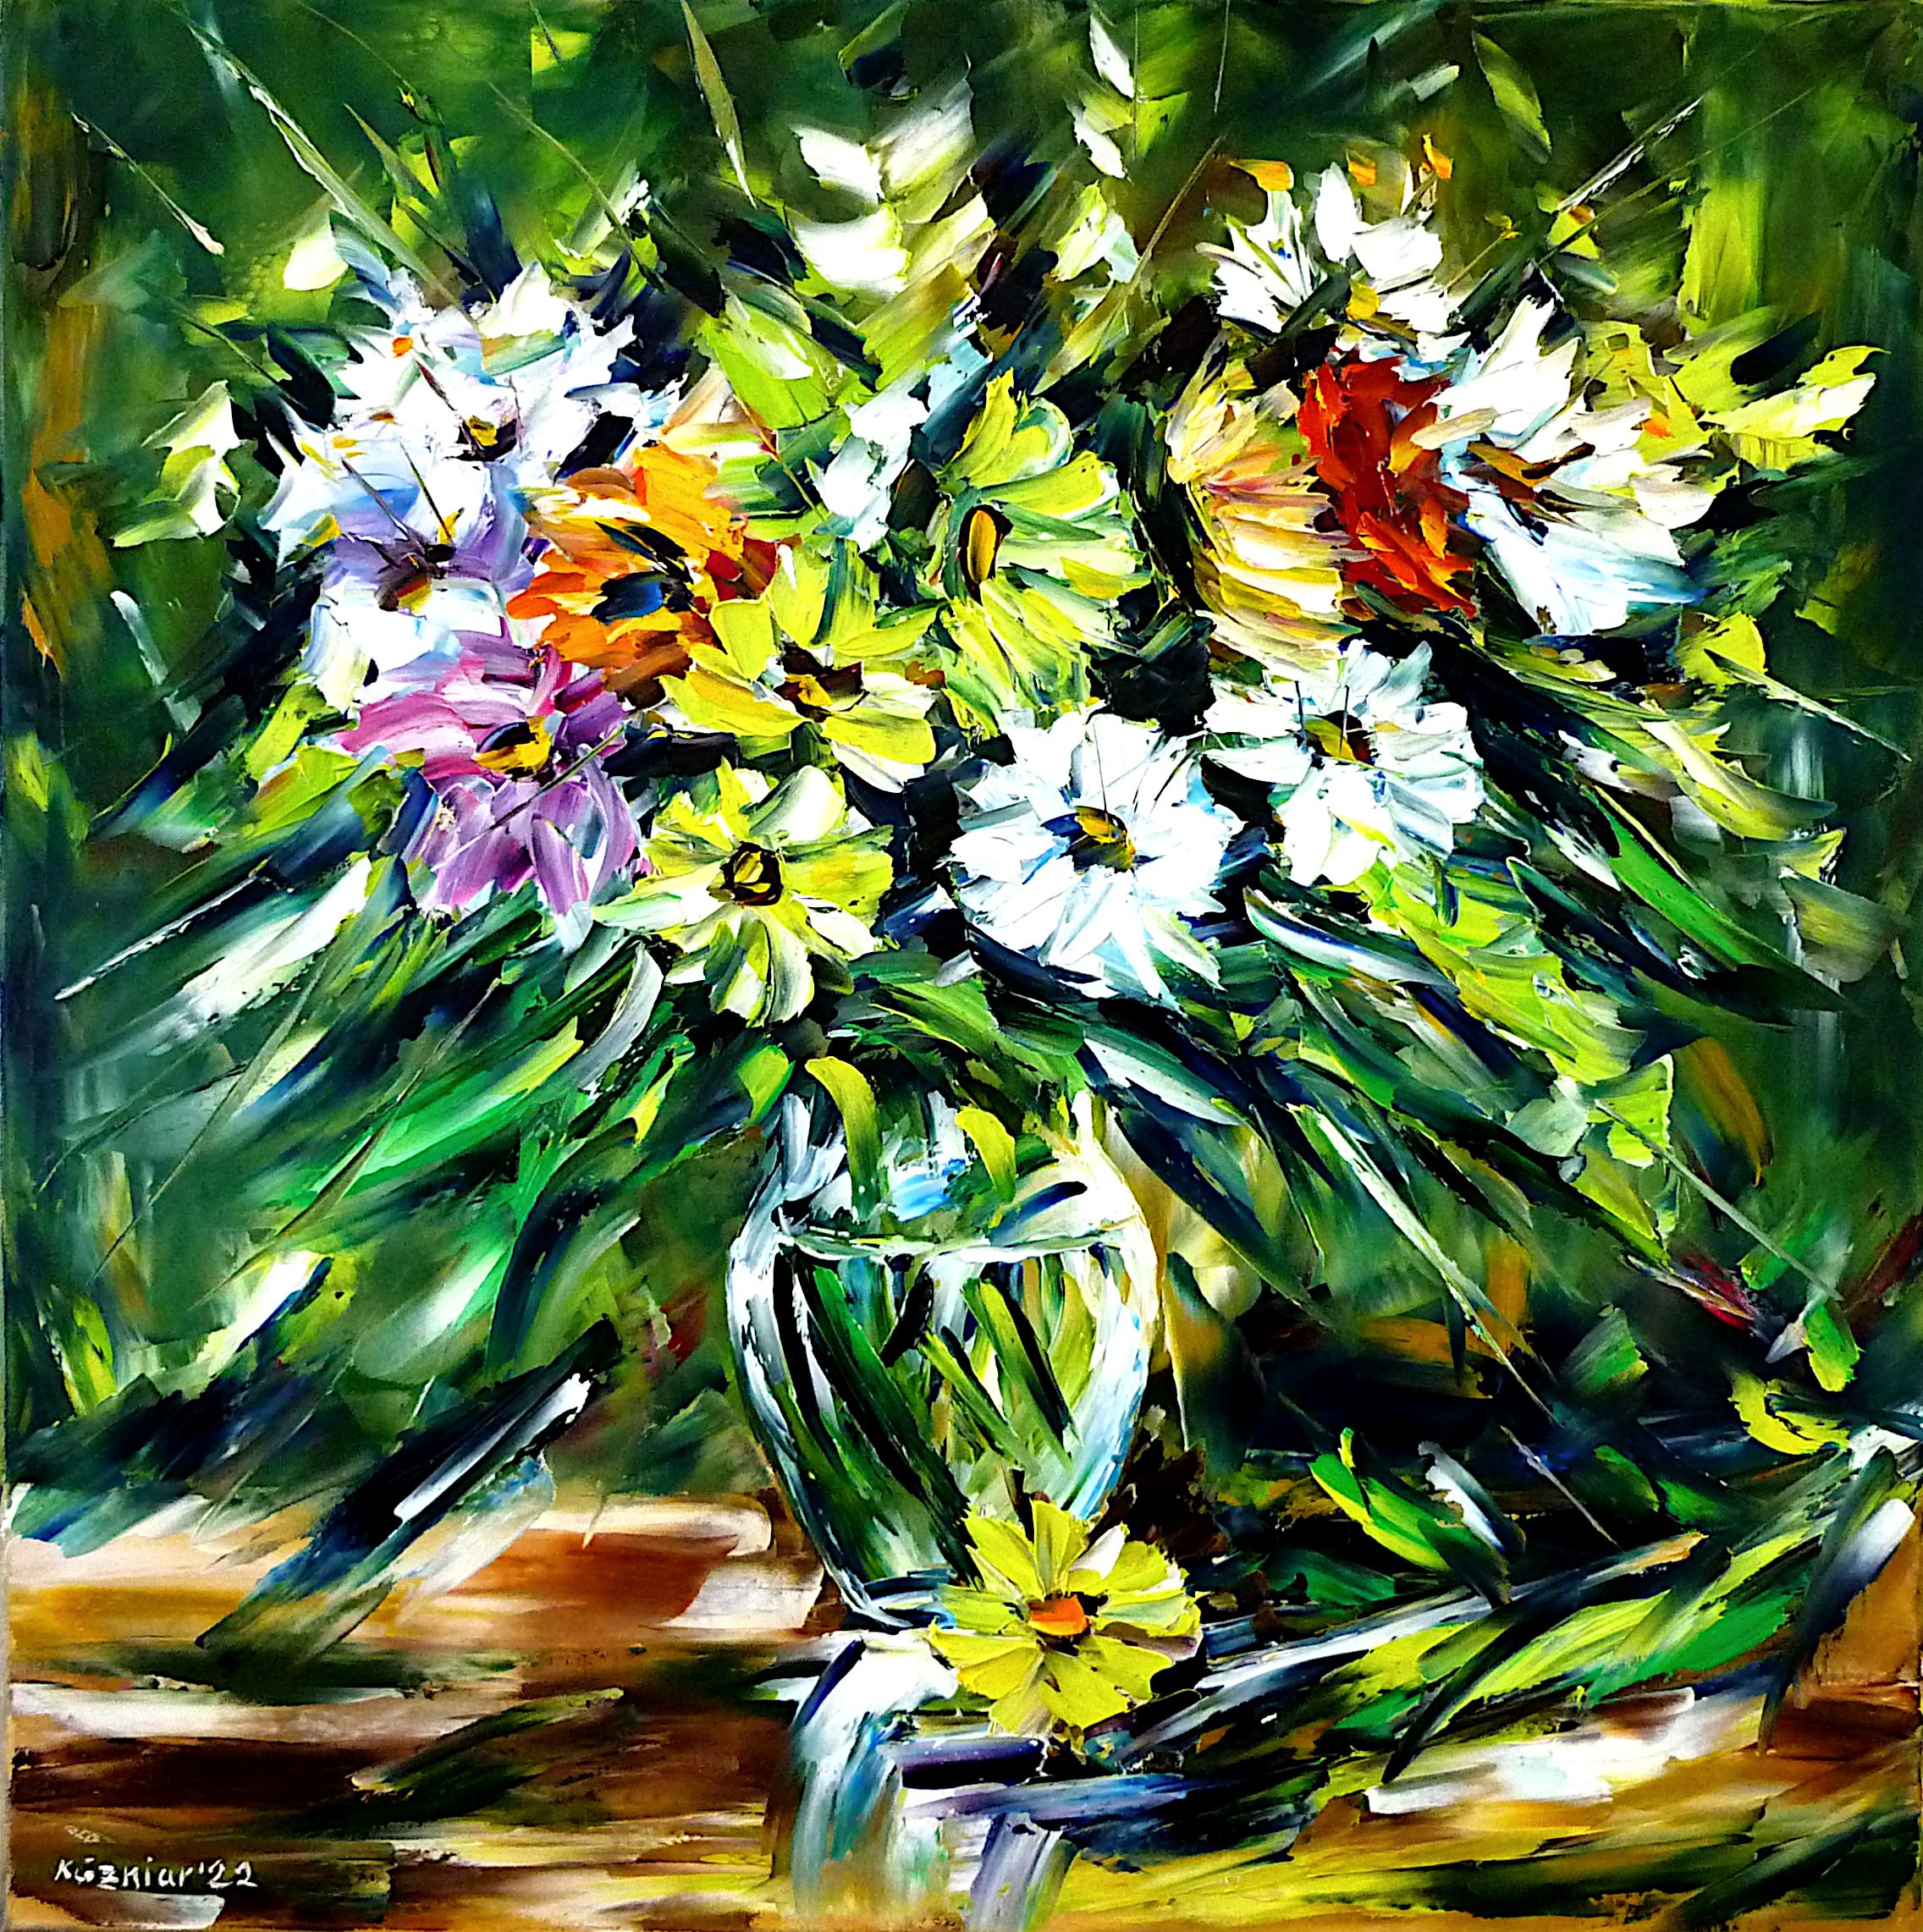 flower still life,Flowers in vase,flower painting,flower picture,winter flowers,beautiful bouquet,lucky flowers,happiness flowers,field flowers,sunday bouquet,garden flowers,white and yellow bouquet,white and yellow flowers,flower abstract,flower love,I love flowers,floristry,flowers of love,dining room picture,dining room painting,floral scent,flower beauty,square format,square picture,square painting,flower lovers,green colors,green painting,green picture,green tones,palette knife oil painting,modern art,impressionism,abstract painting,lively colors,colorful painting,bright colors,light reflections,impasto painting,figurative